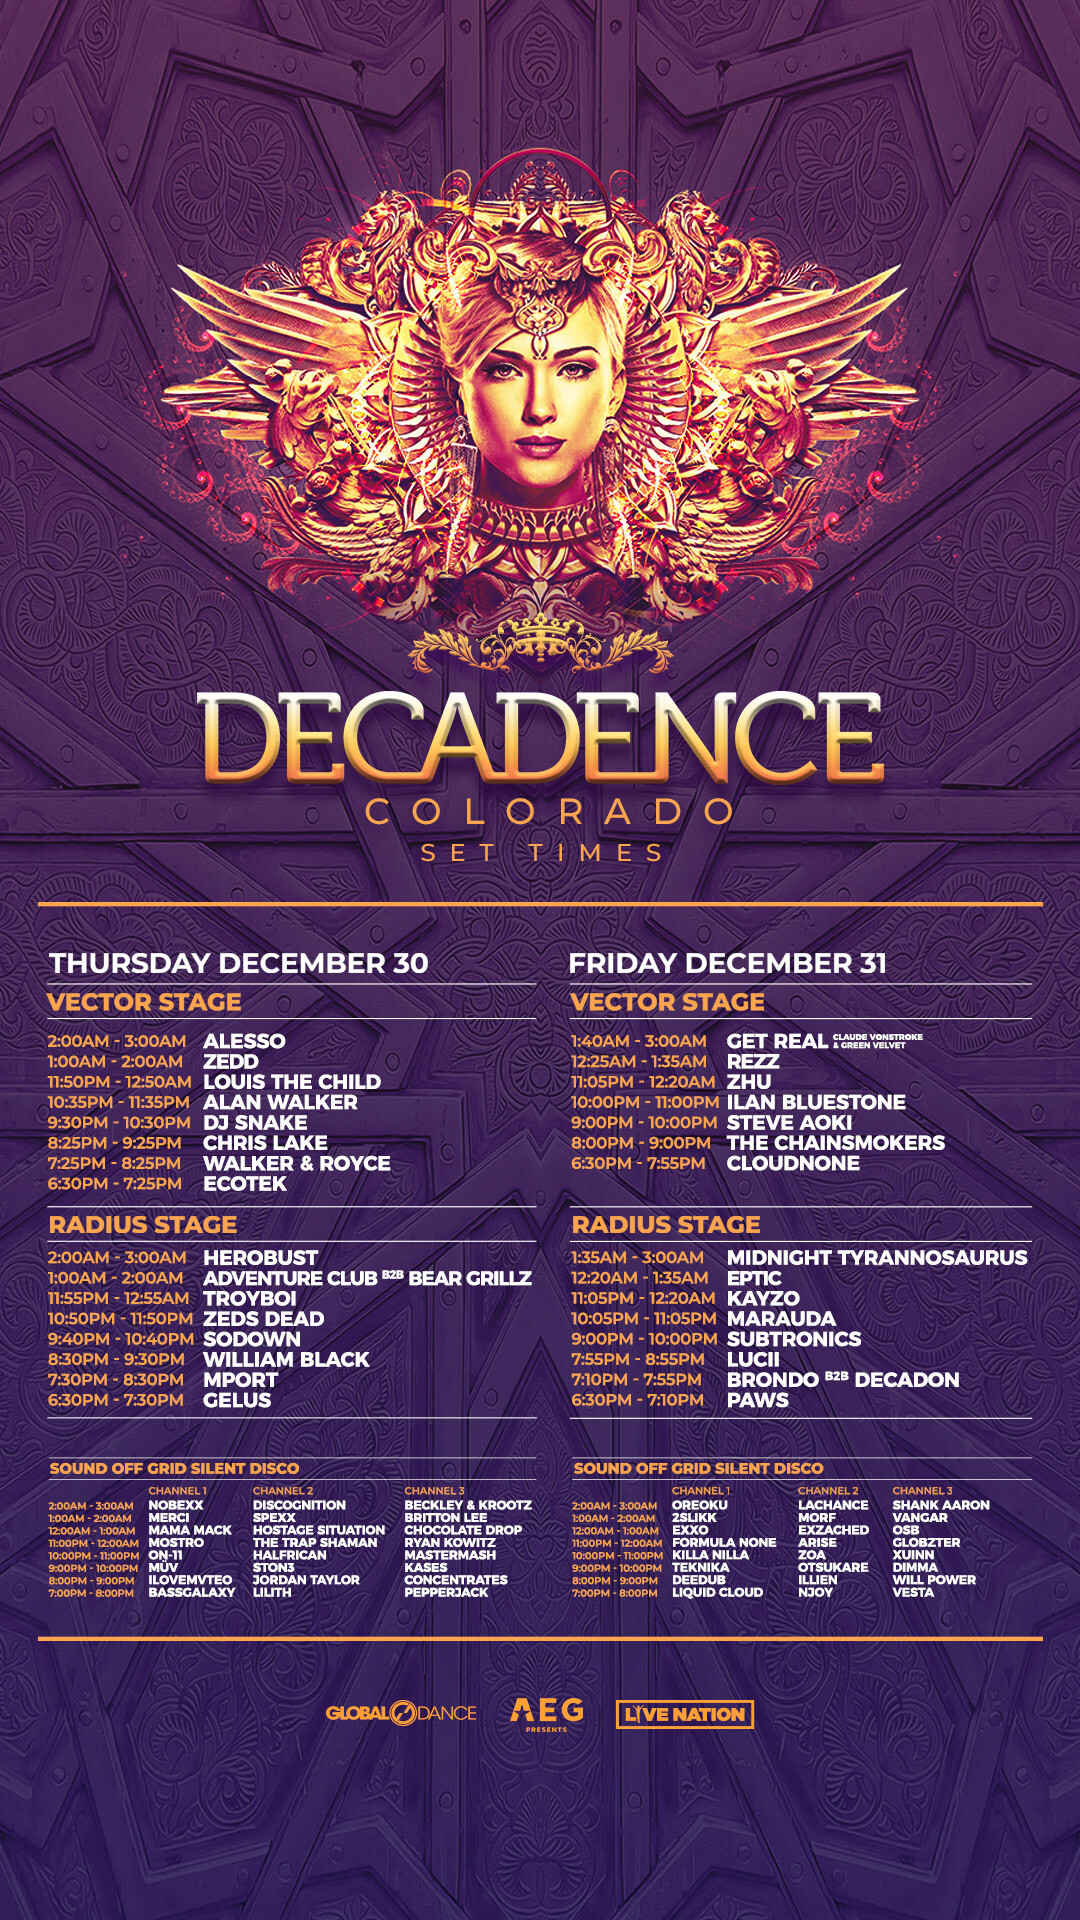 Decadence Colorado set times are up : r/aves